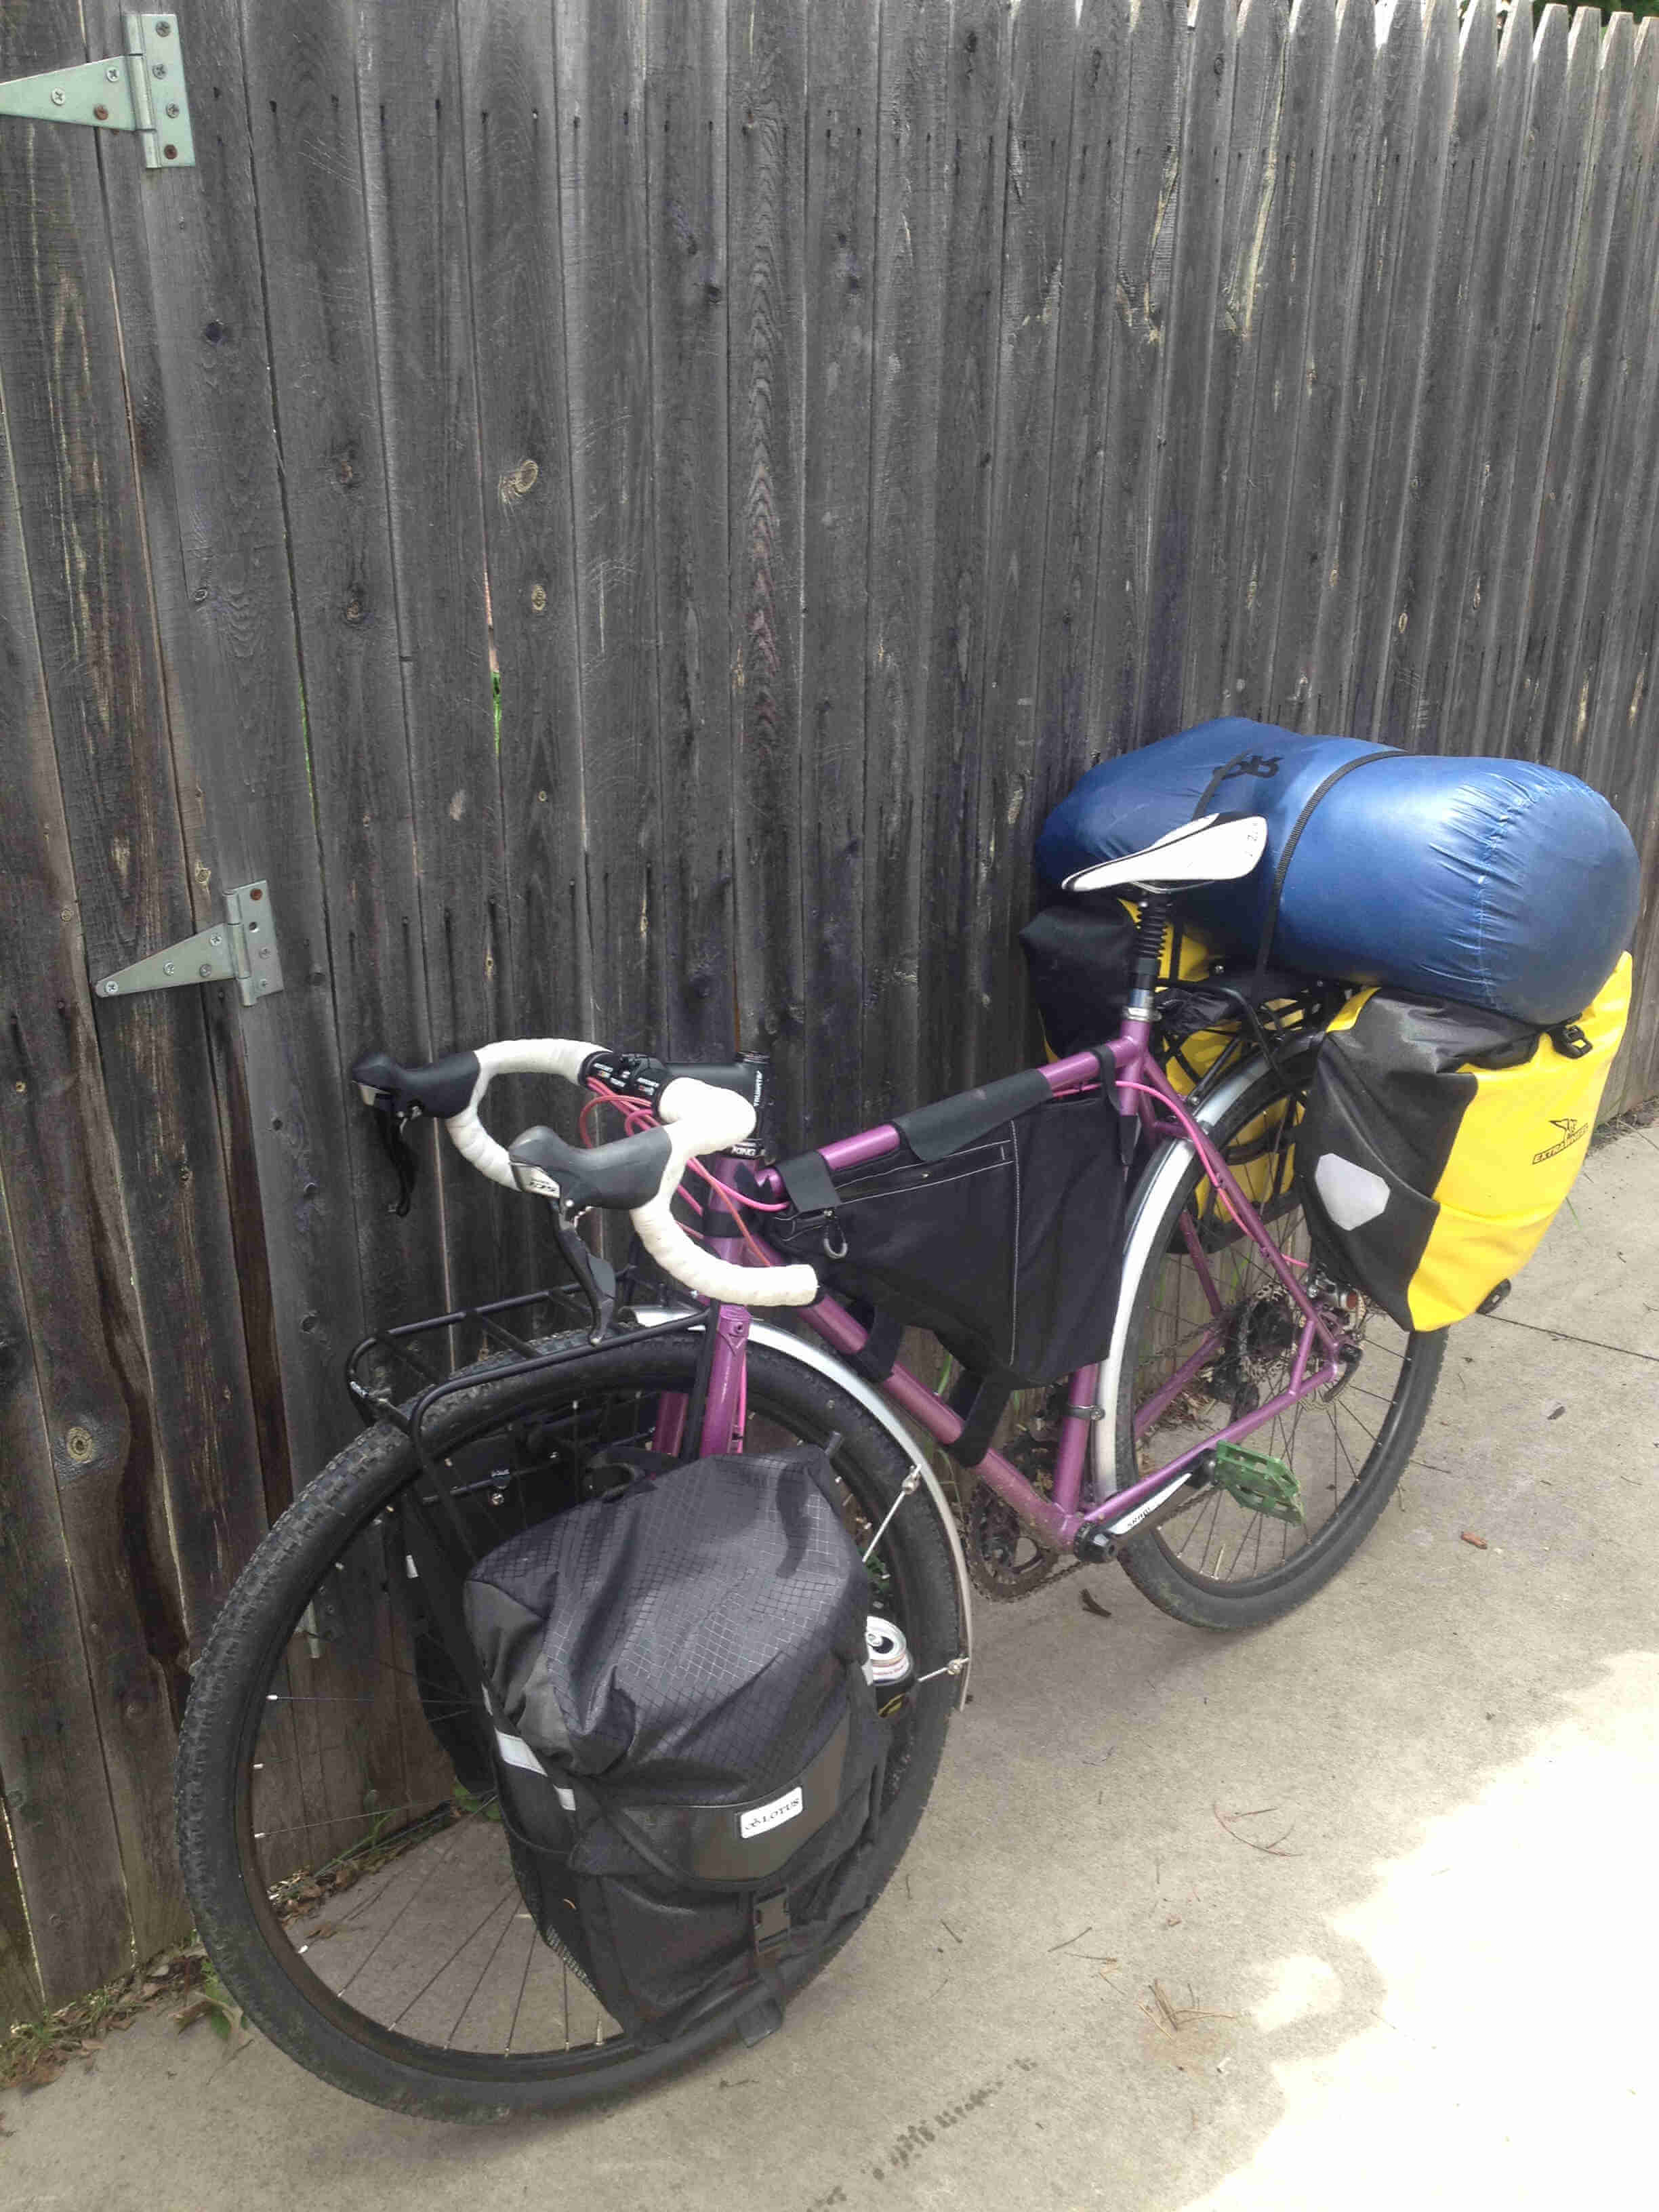 Left side view of a purple Surly Straggler bike, loaded with gear, leaning against a wood fence wall on a sidewalk